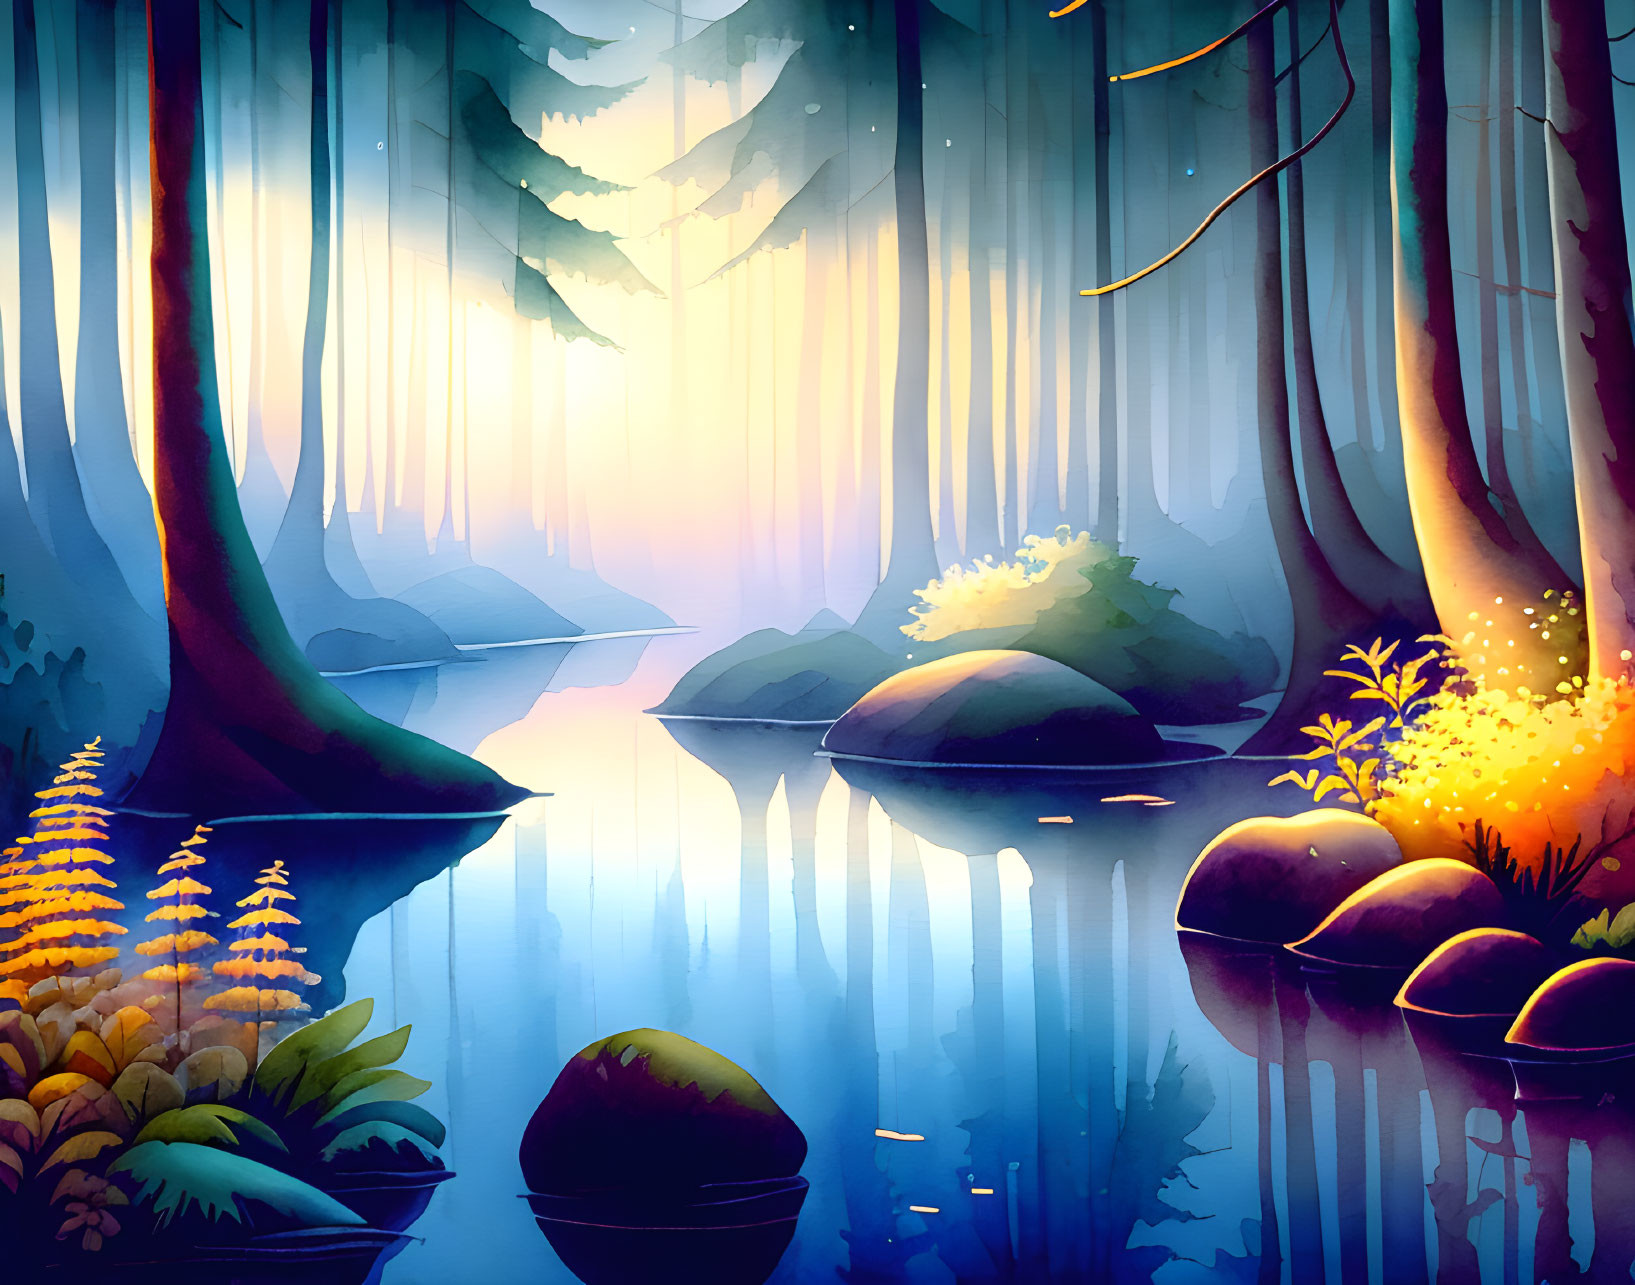 Tranquil forest scene with river and warm glow illuminating rocks and lush vegetation